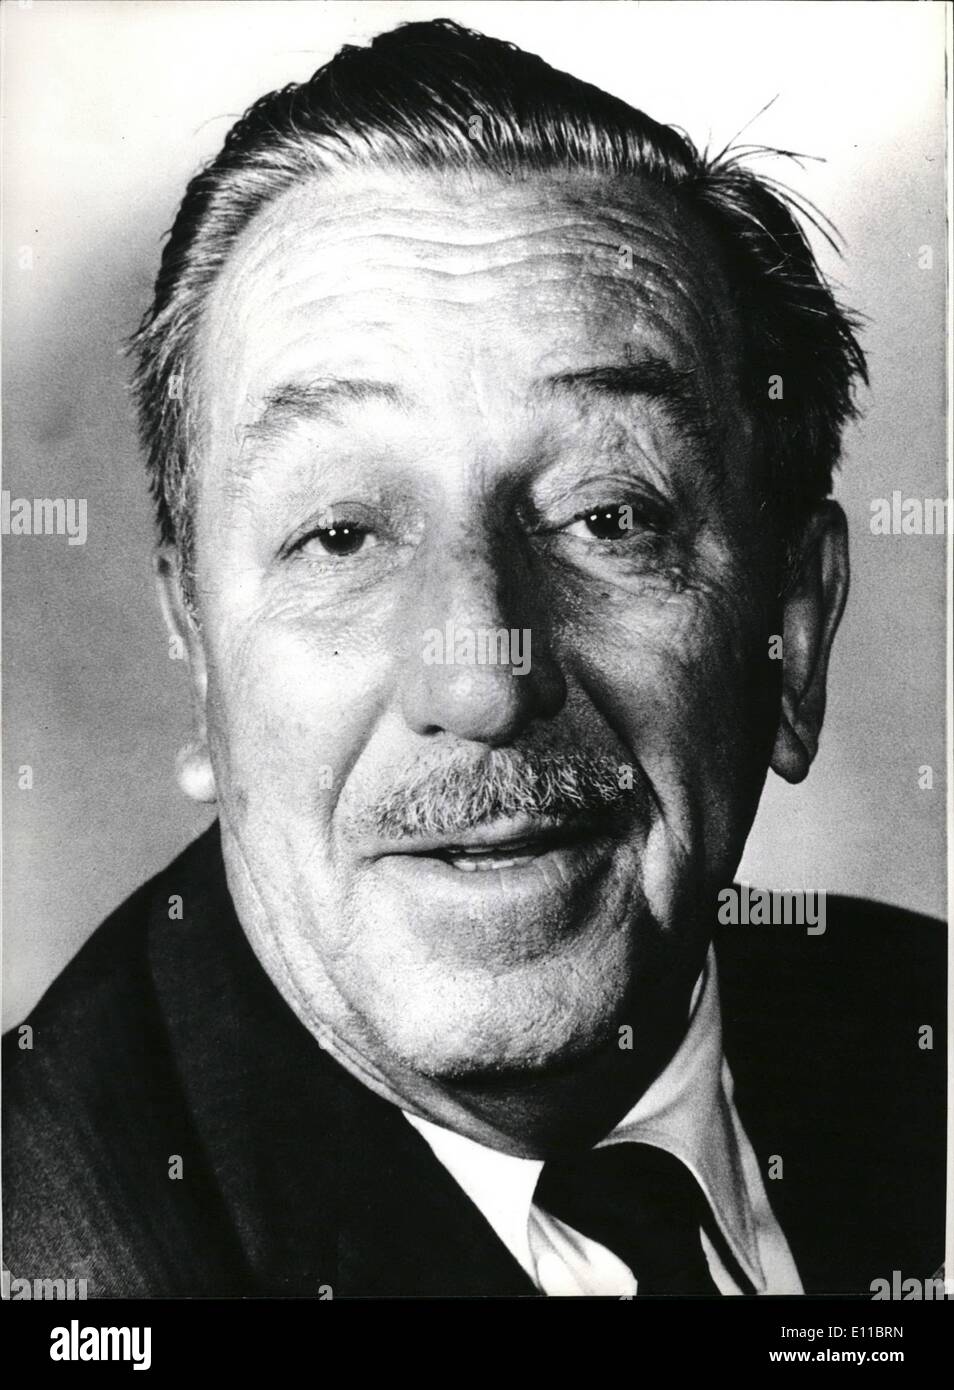 Dec. 12, 1976 - 75th Birthday of Walt Disney: On December 5h 1976 it will be 75 years ago, that Walt Disney (picture) was born in Chicago. Disney started as an advertisement designer. 1922 he made his first experiments with animated cartoons. Four years later he started the Mickey Mouse series, which made him famous all over the world. Soon followed ''Snow-white'', ''Fantasia'', ''Bambi'', ''Cinderella'', ''Alice in Wonder Land''. Besides them however, Walt Disney also made cultural films and documentaries Stock Photo